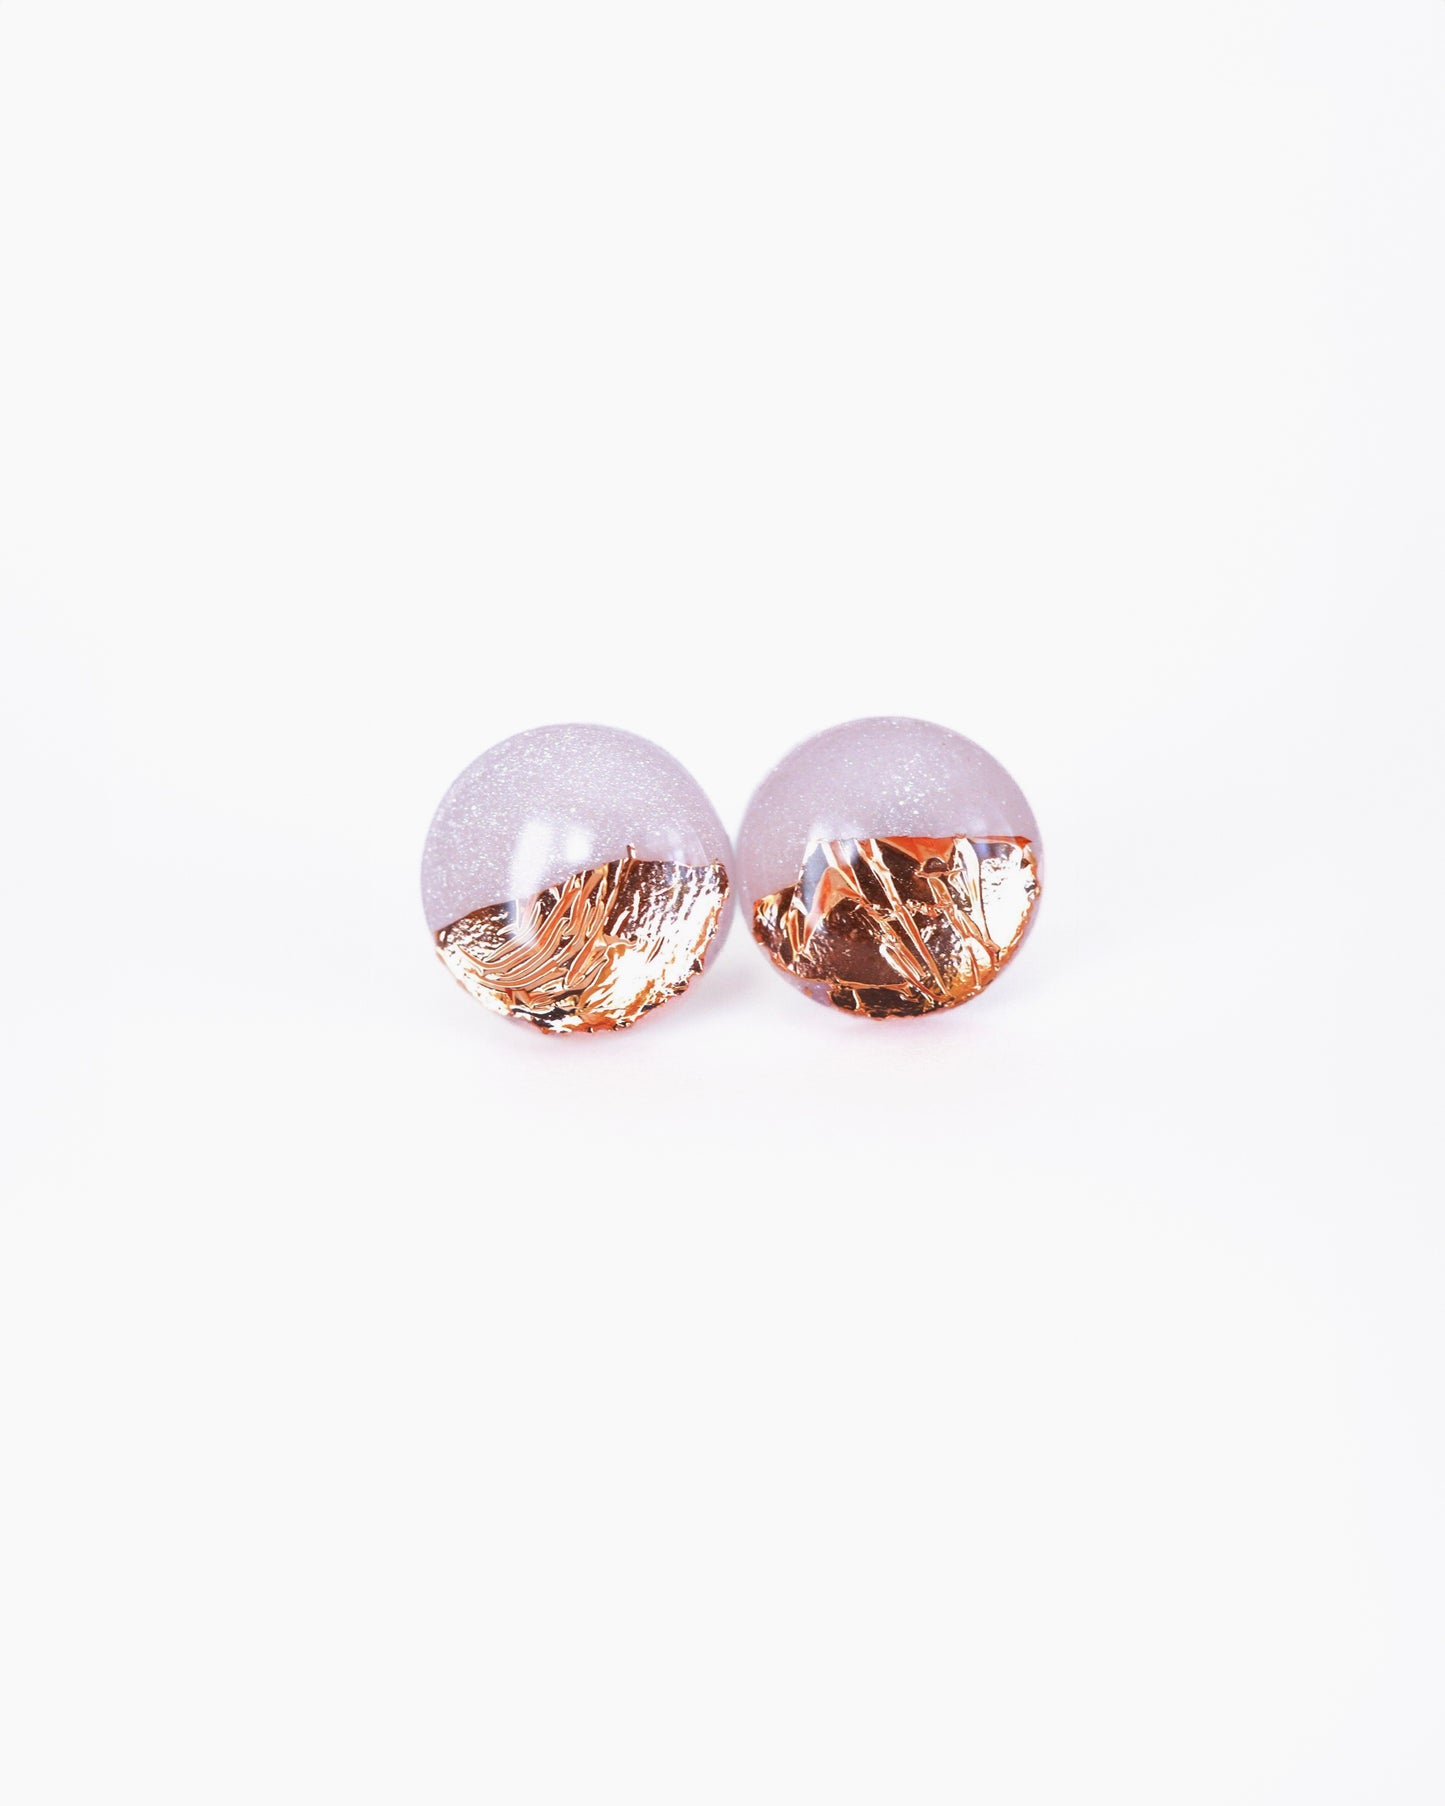 Pink rose stud earrings with gold foil